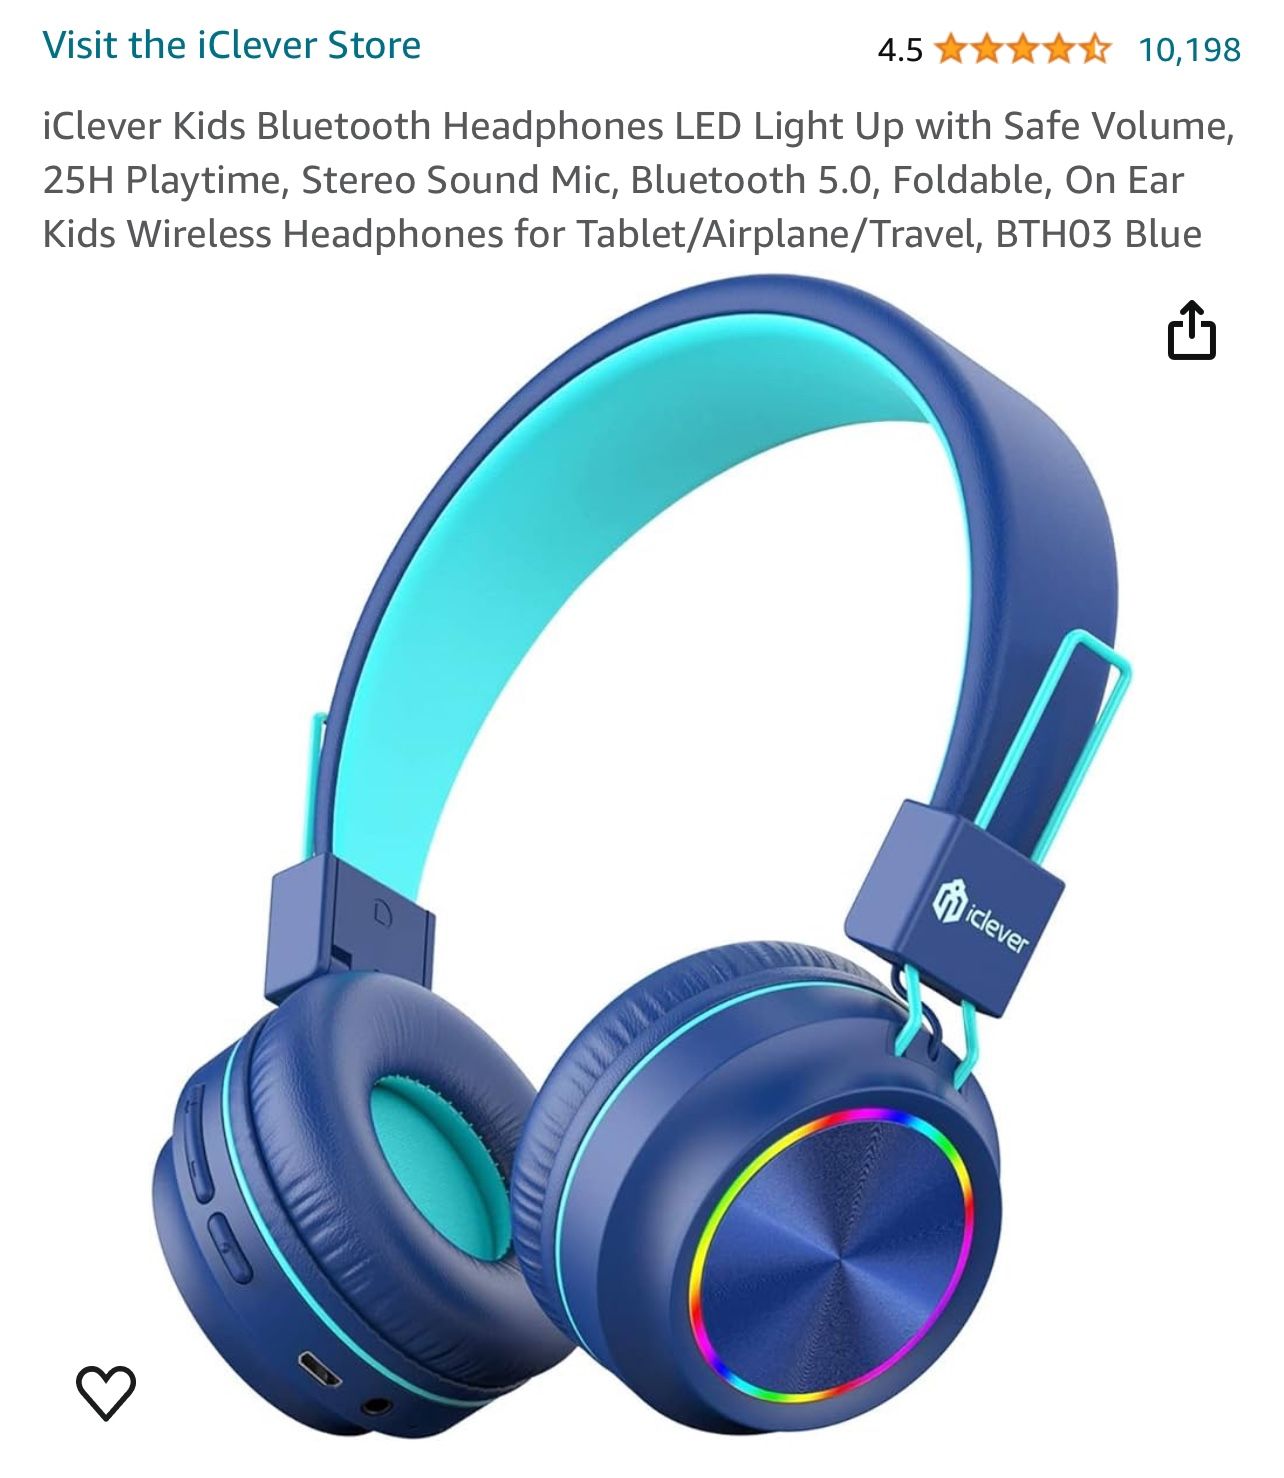 iClever Kids Bluetooth Headphones LED Light Up with Safe Volume